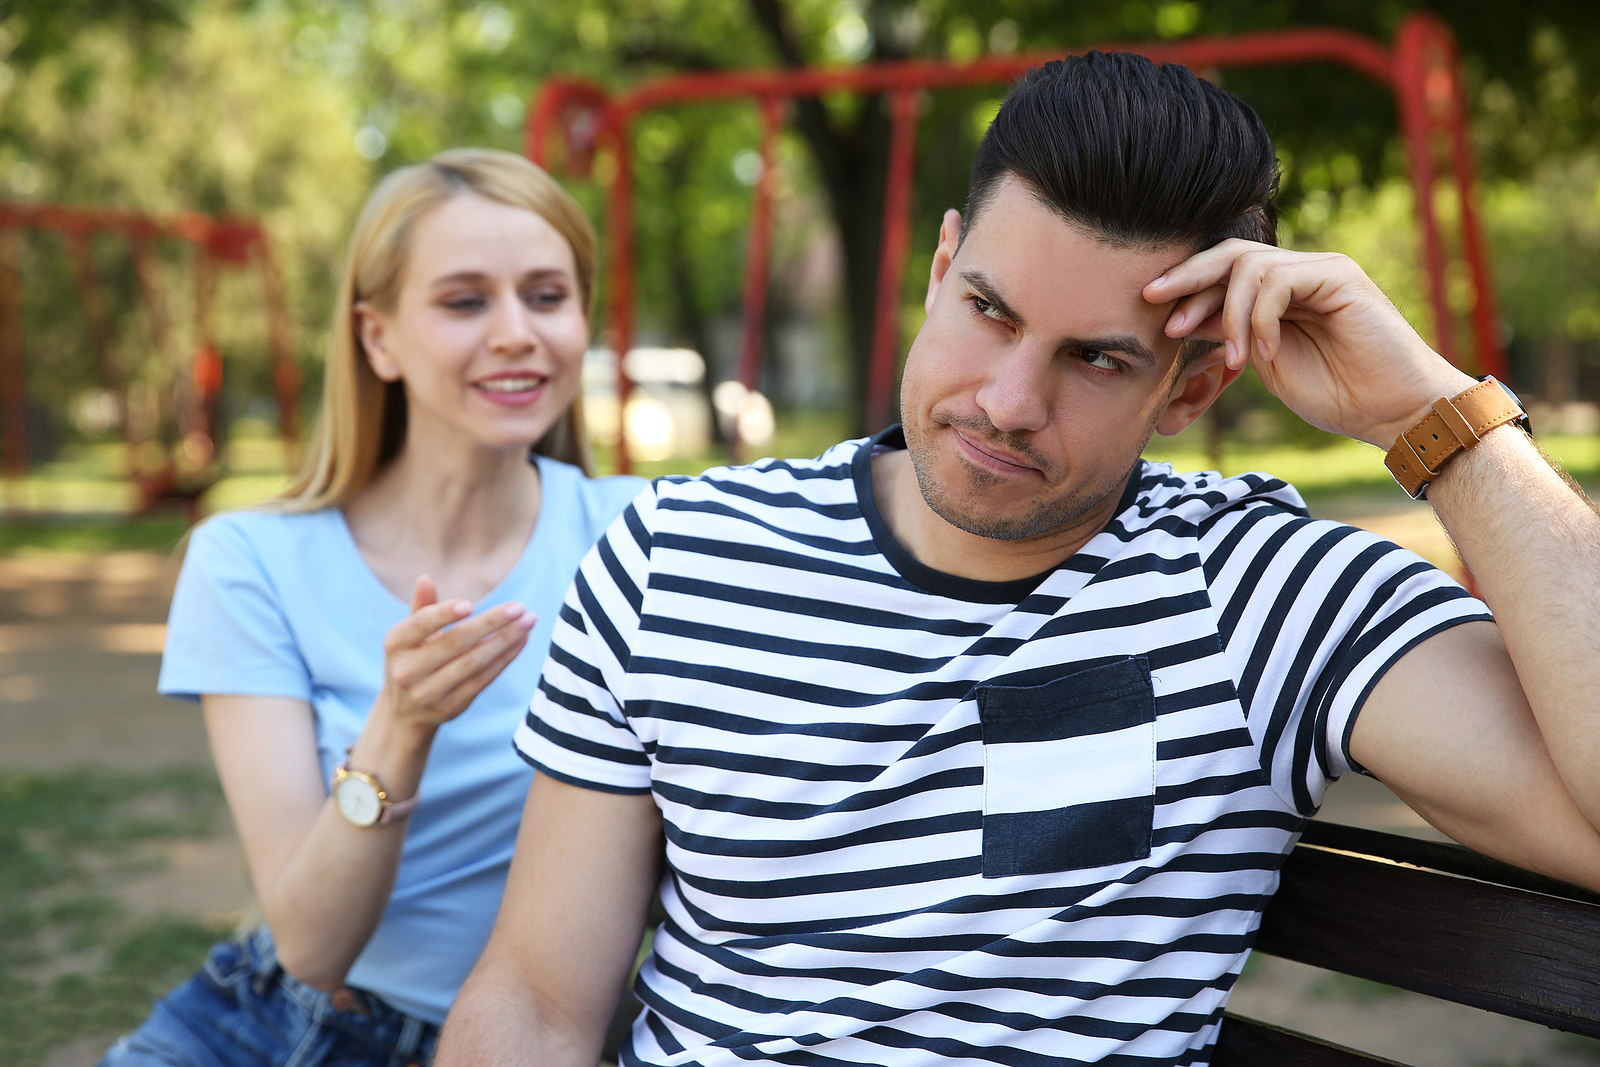 Image of a young man with a striped shirt, looking away with an annoyed look while his date talks to him while they sit on a bench.